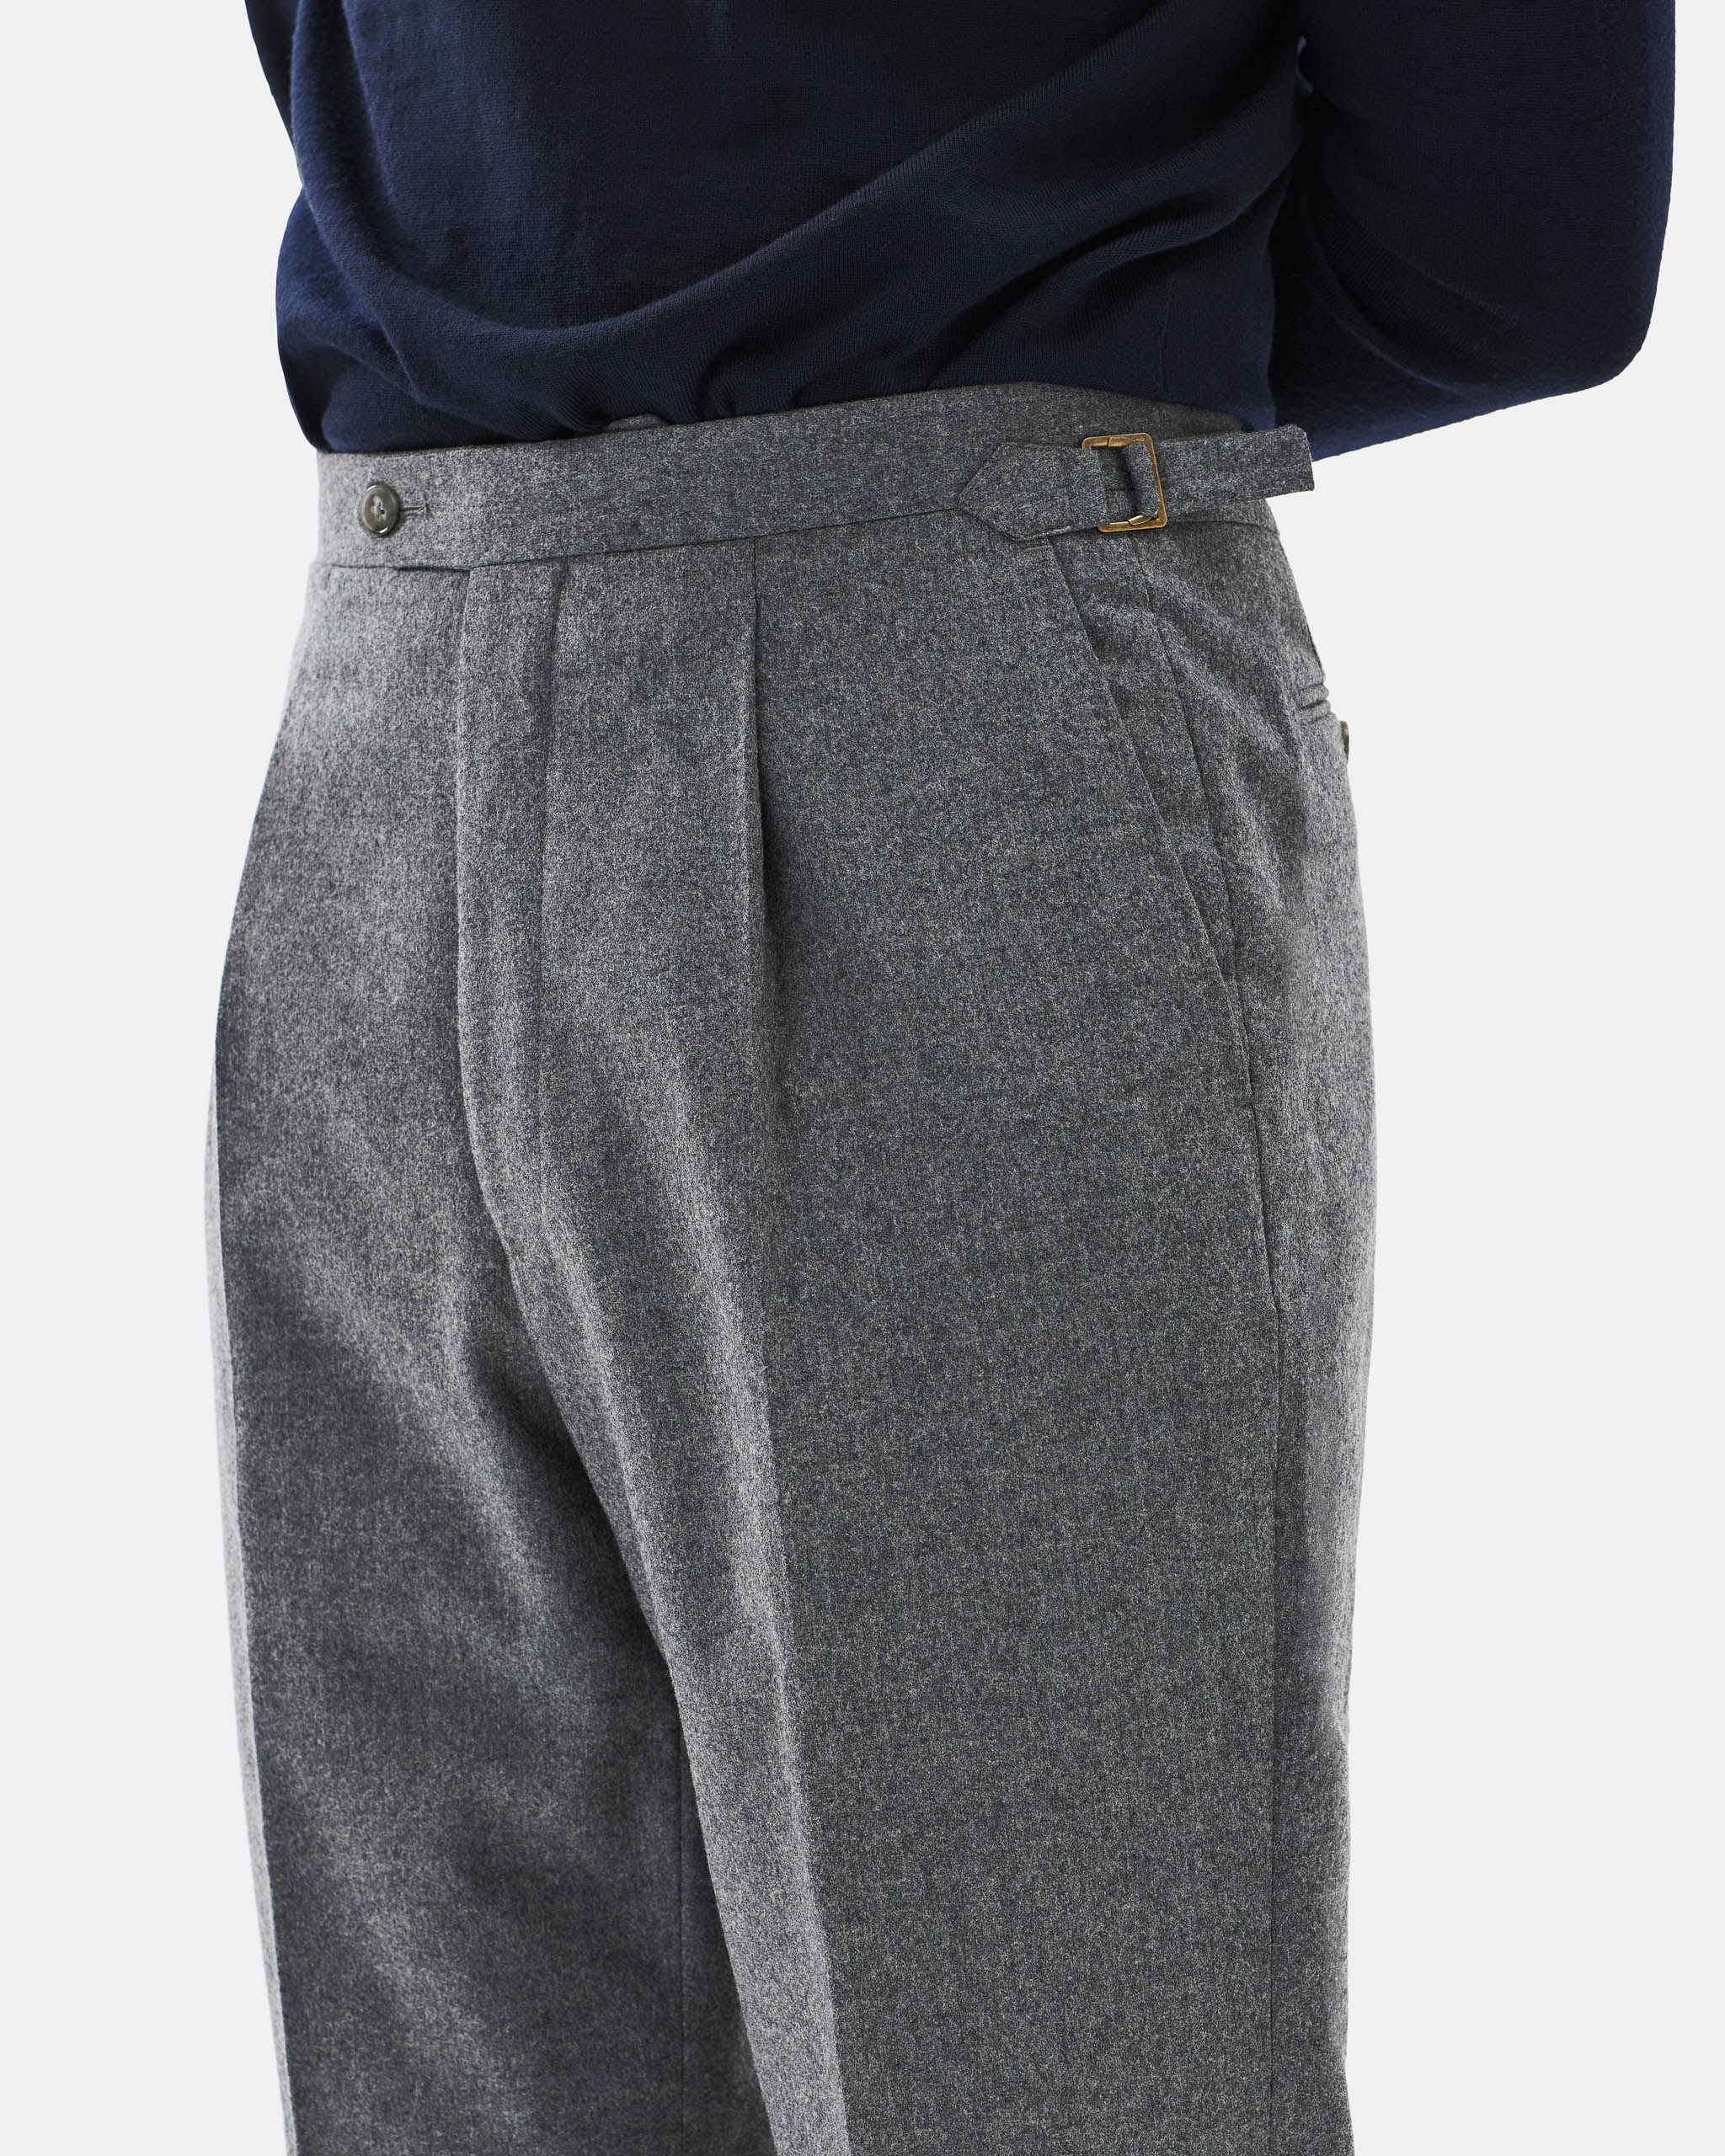 Trousers flannel mid grey image 3